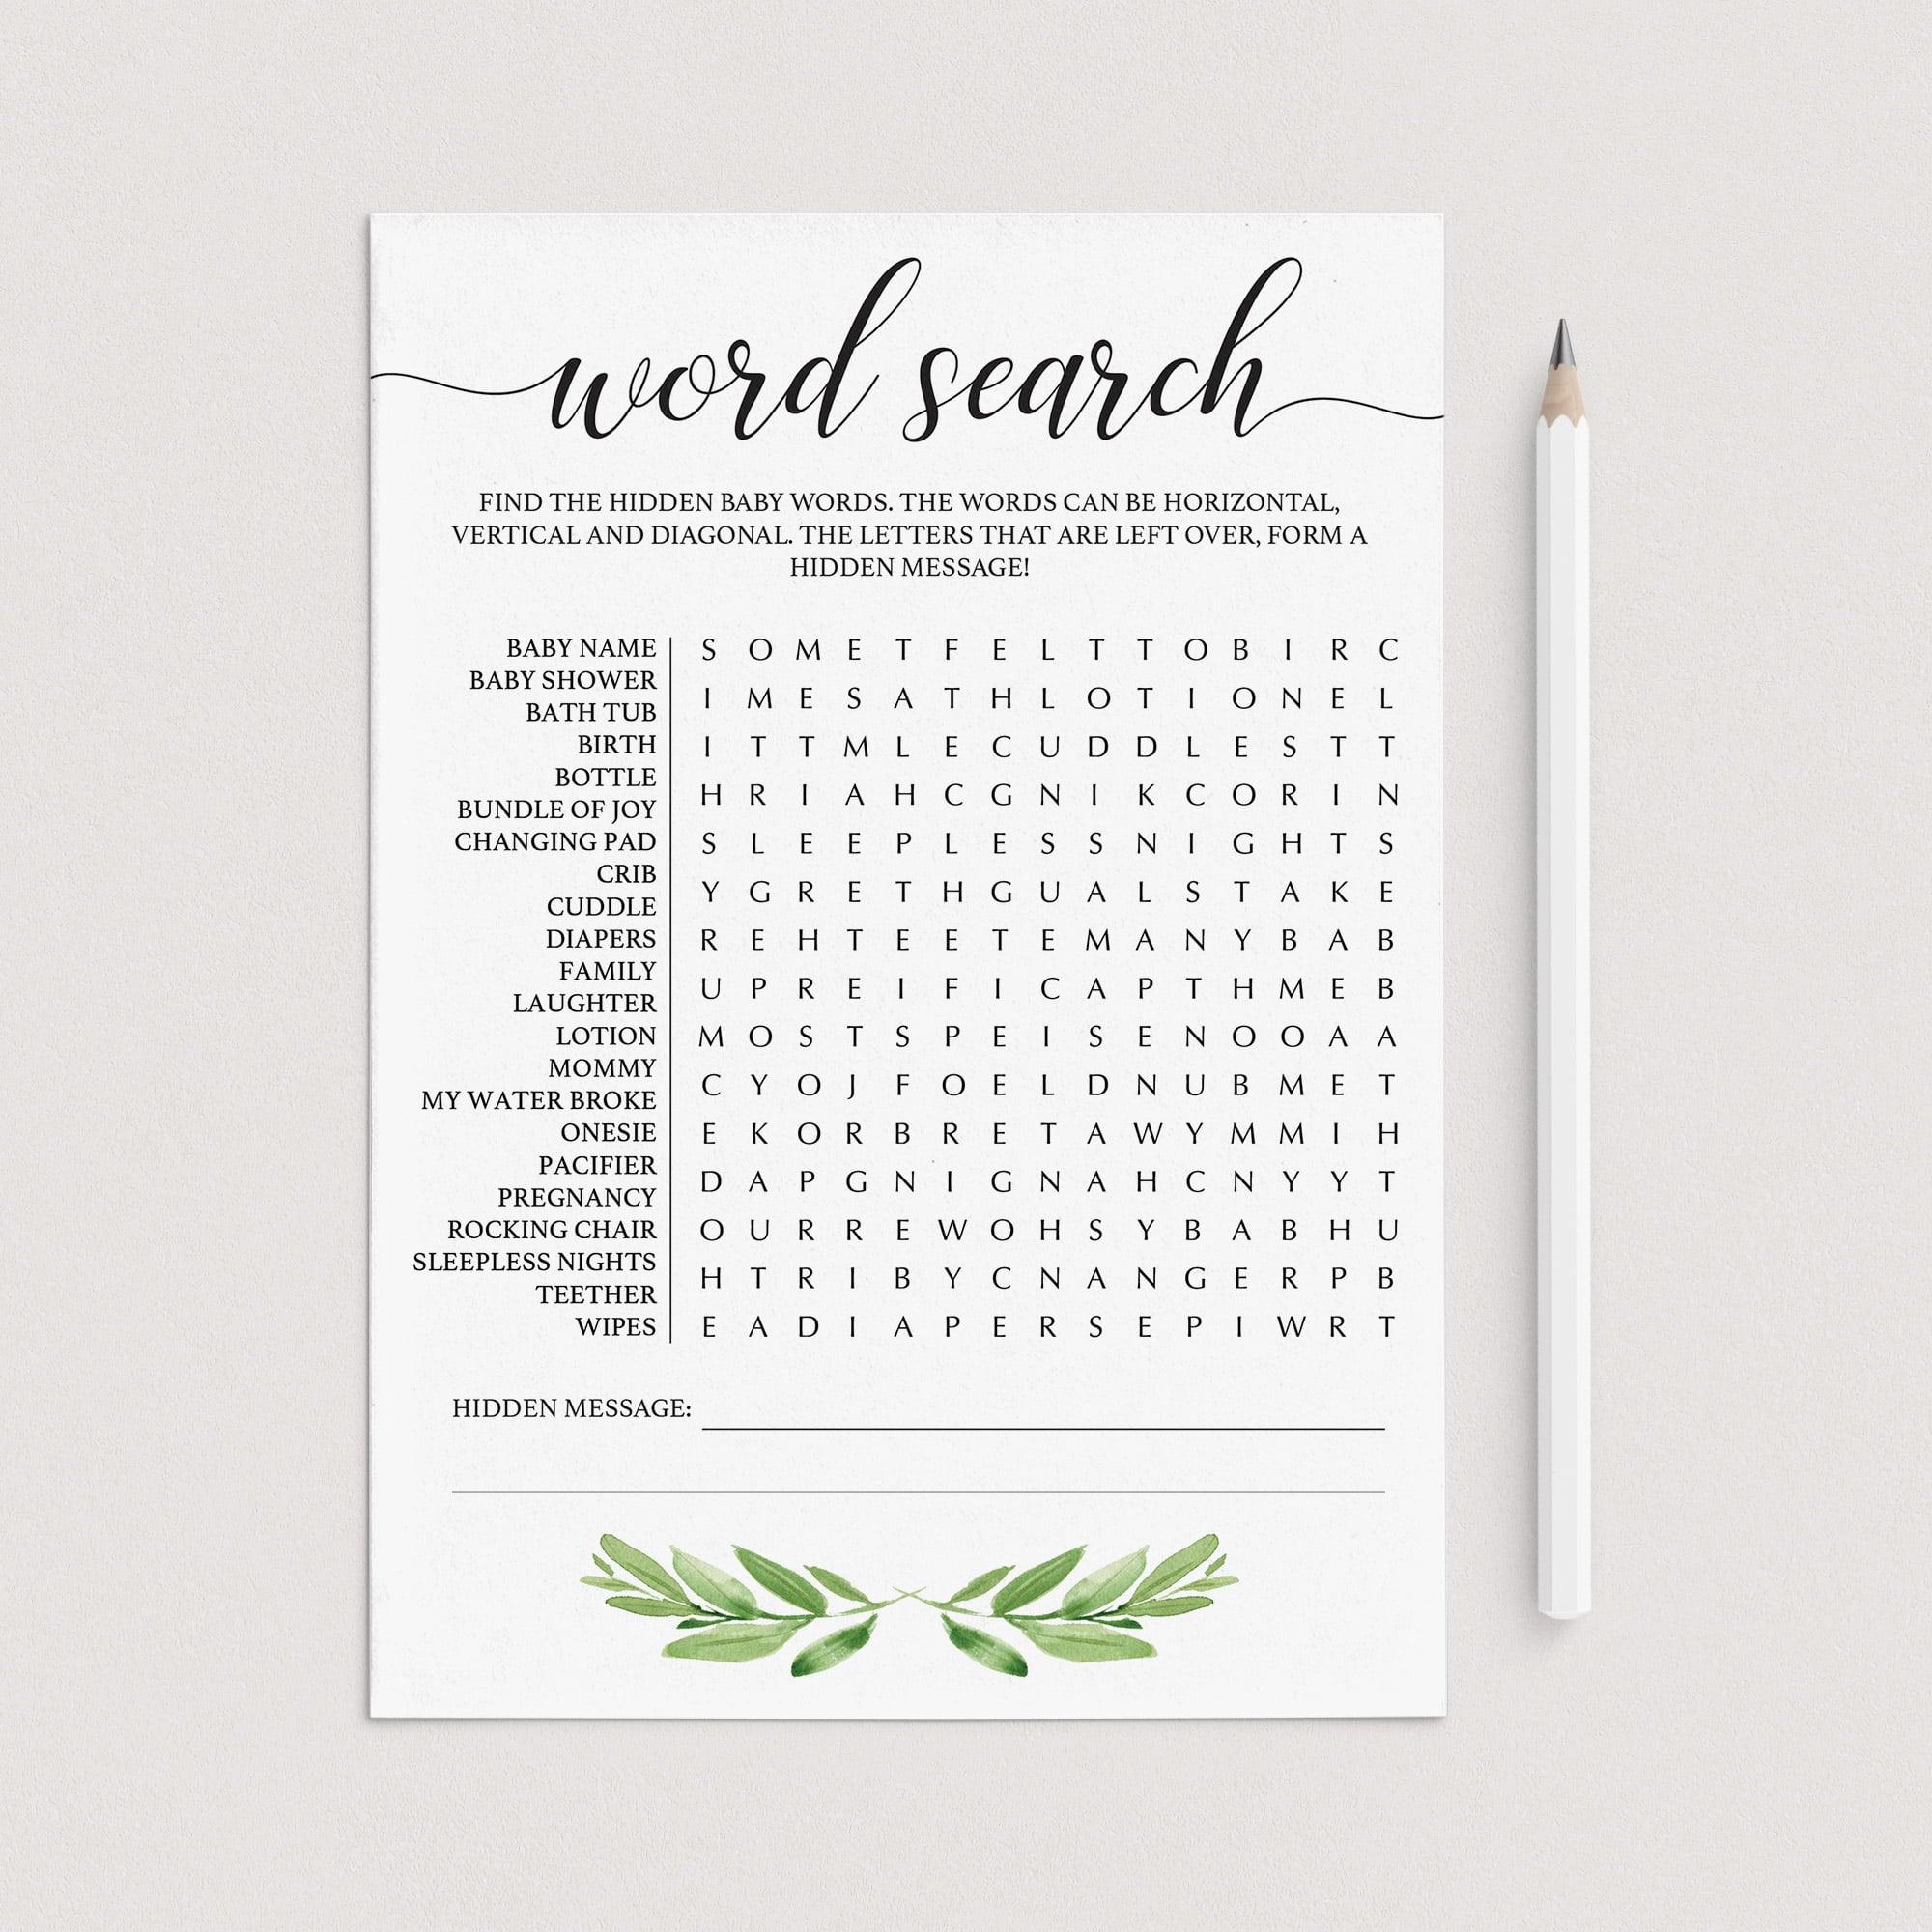 Green baby shower word search game printable by LittleSizzle